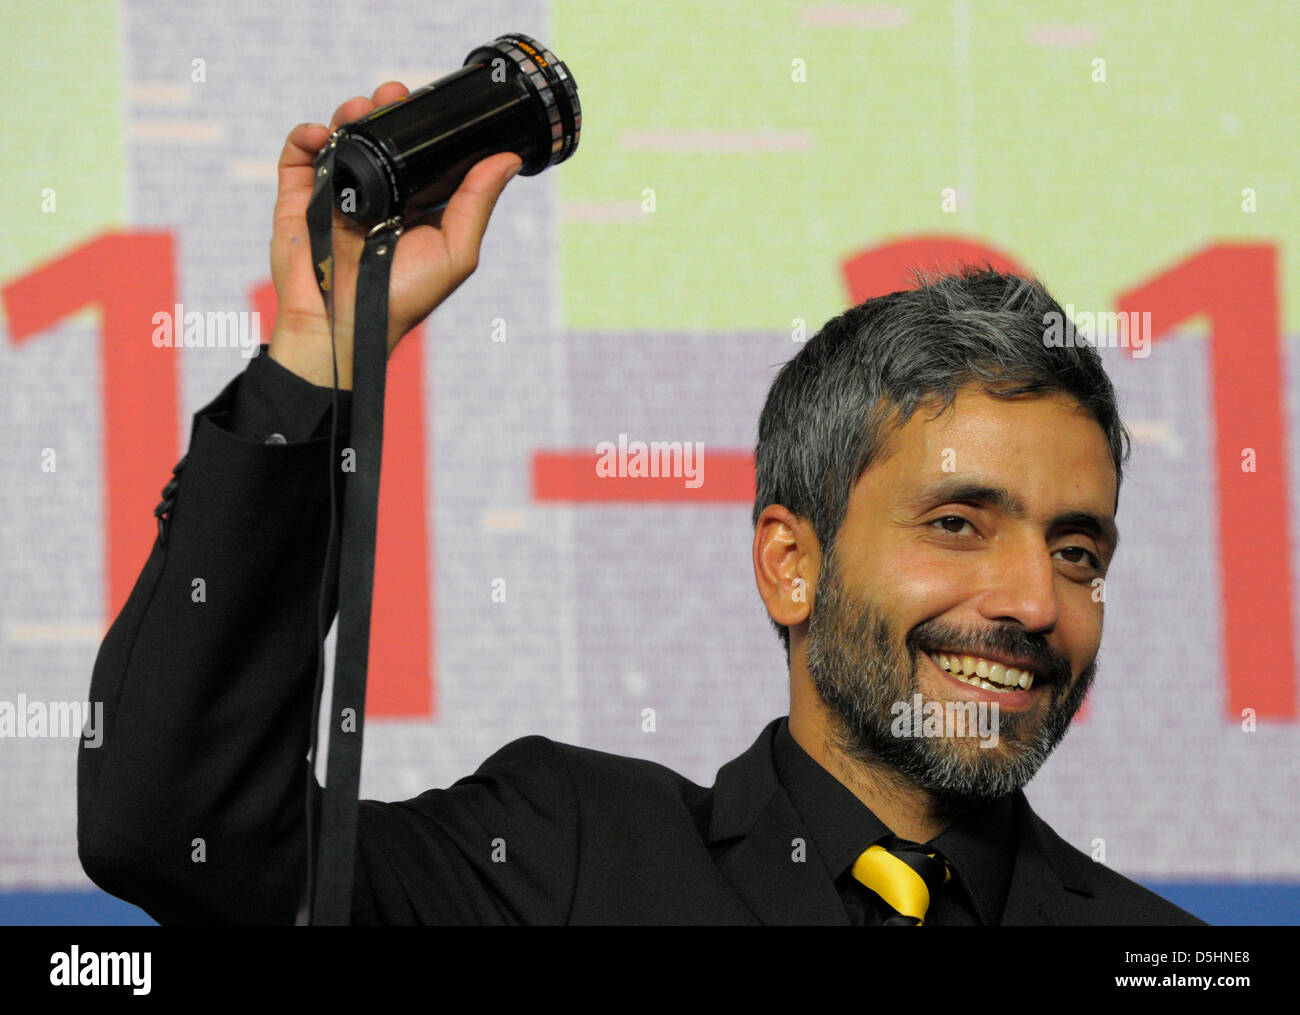 Director Babak Najafi poses with the 'Best First Feature Award' for his film 'Sebbe' during the awarding ceremony of the 60th Berlinale International Film Festival in Berlin, Germany, Saturday, 20 Febuary 2010. Photo: Soeren Stache dpa/lbn  +++(c) dpa - Bildfunk+++ Stock Photo